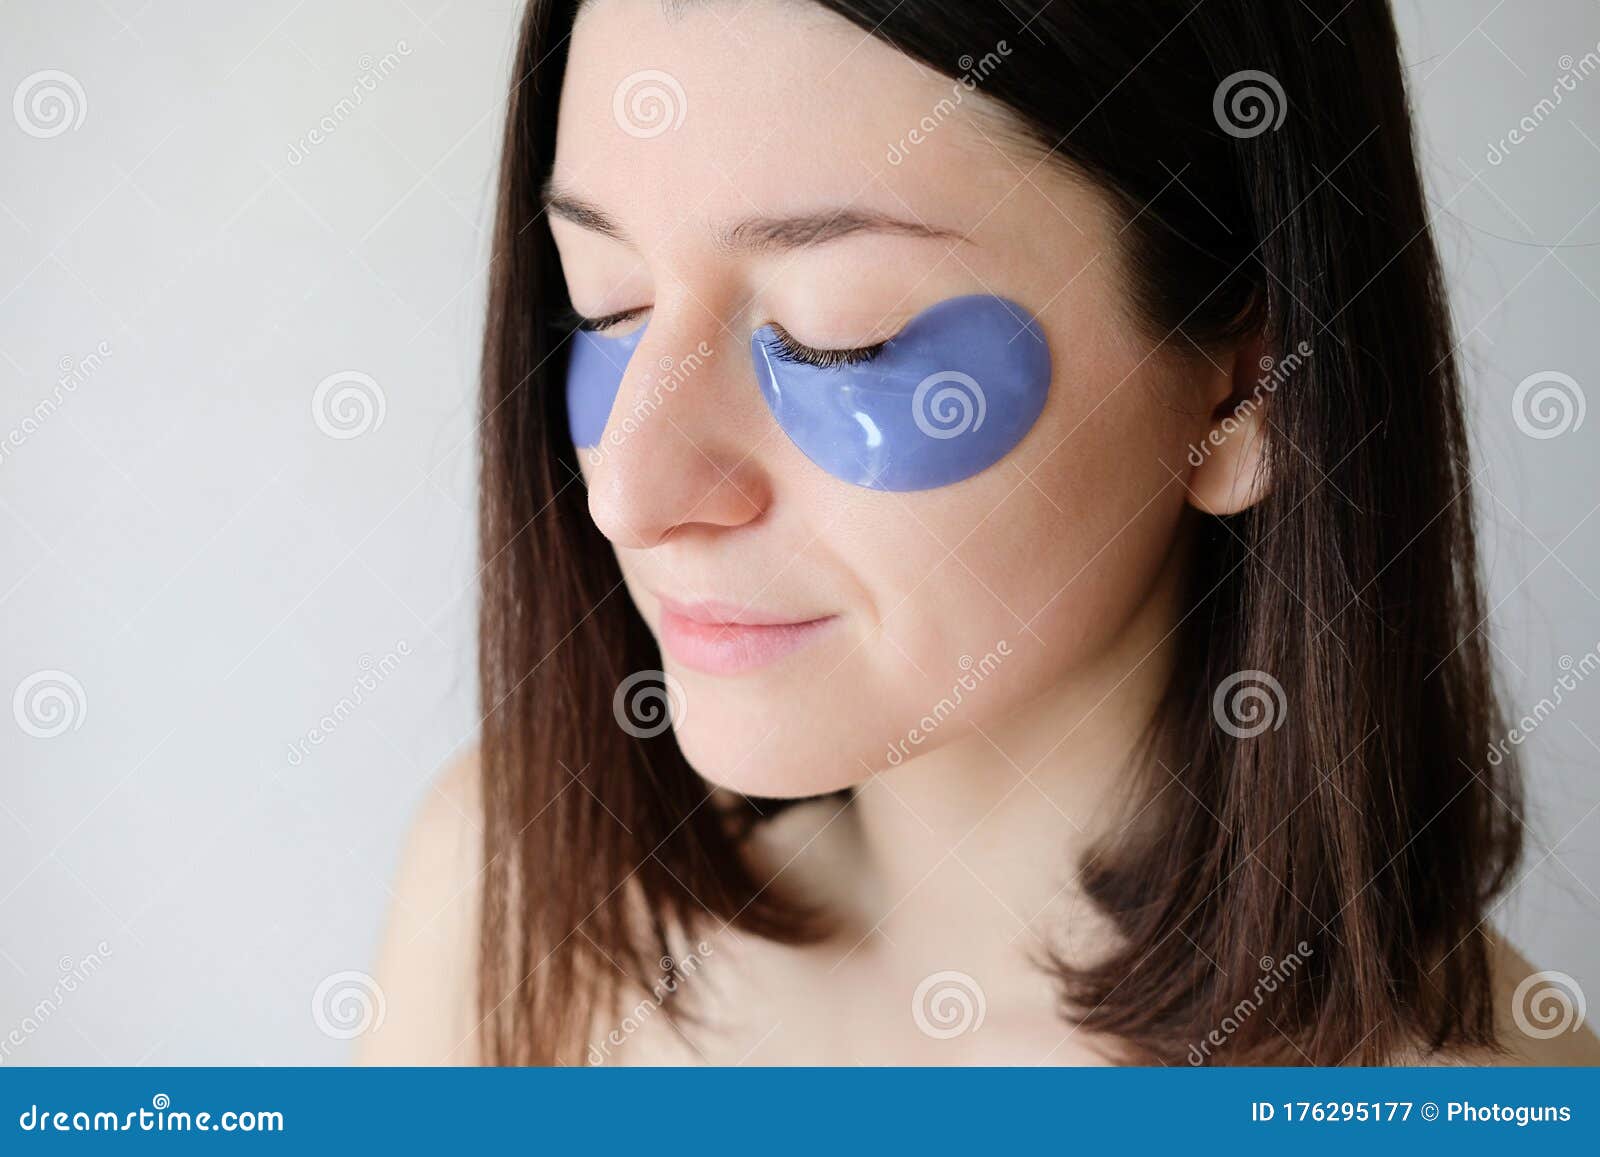 young woman with under eye patches in her face. collagen eye mask for puffiness, close-up view. facial skin care and beauty